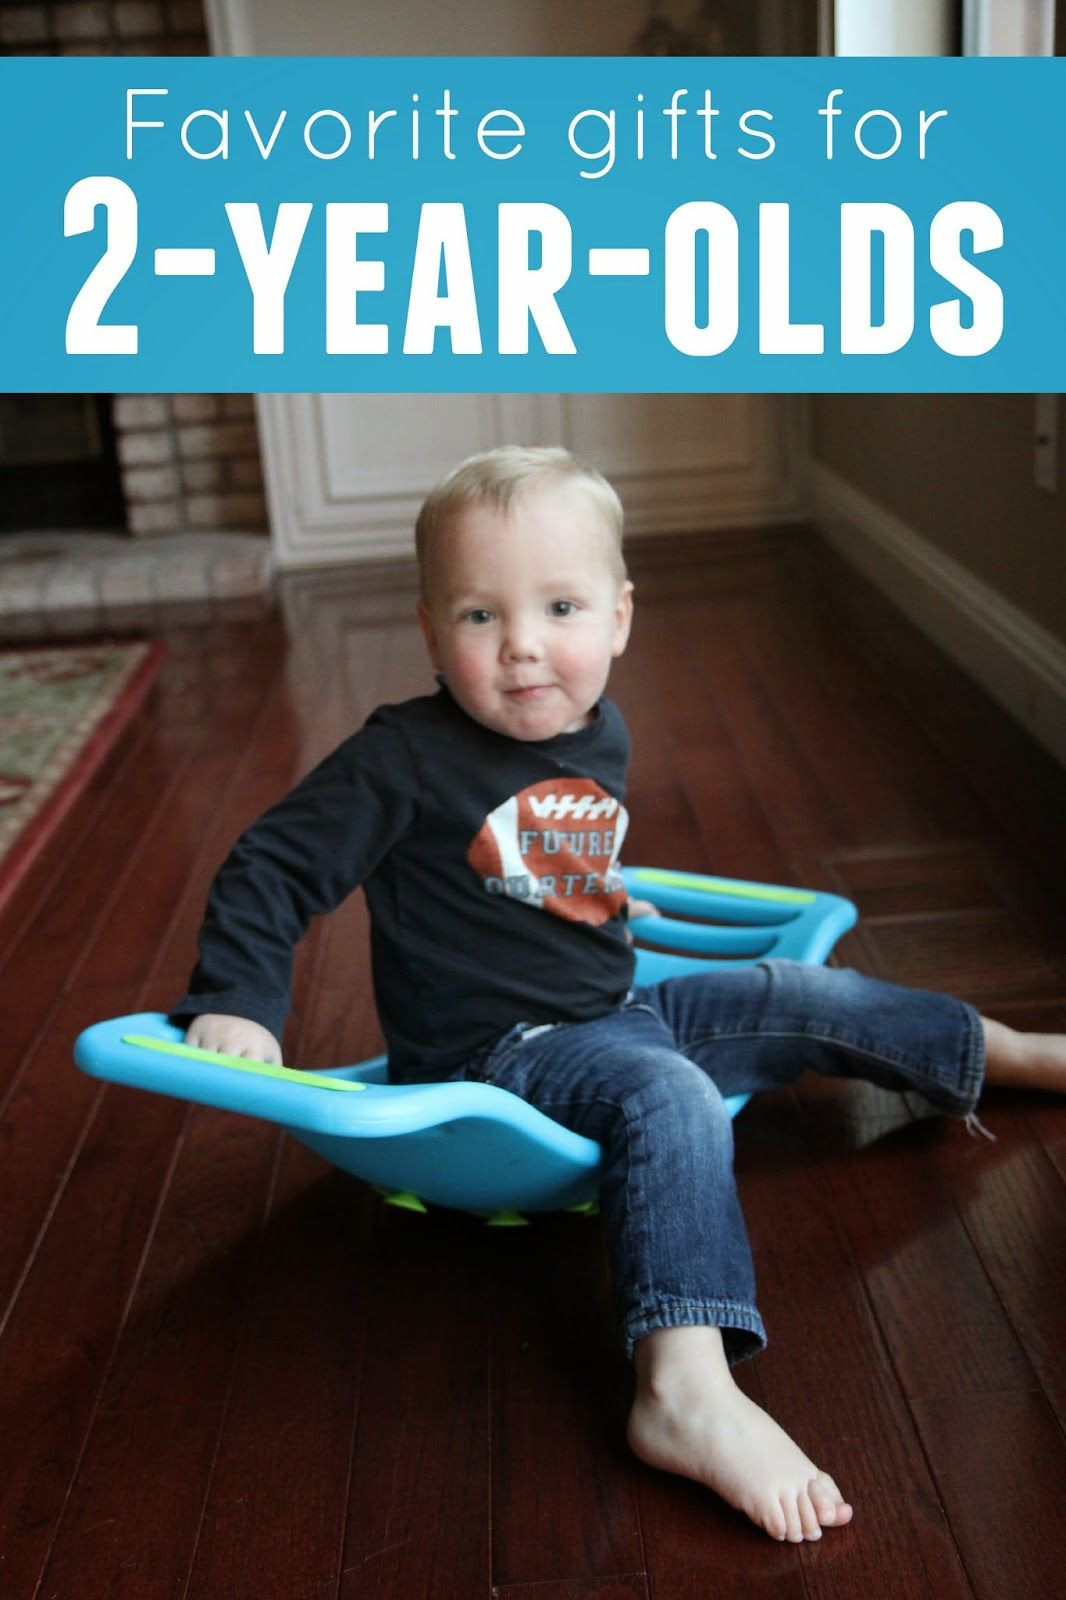 2 Year Old Birthday Gift Ideas
 Favorite Gifts for 2 Year Olds